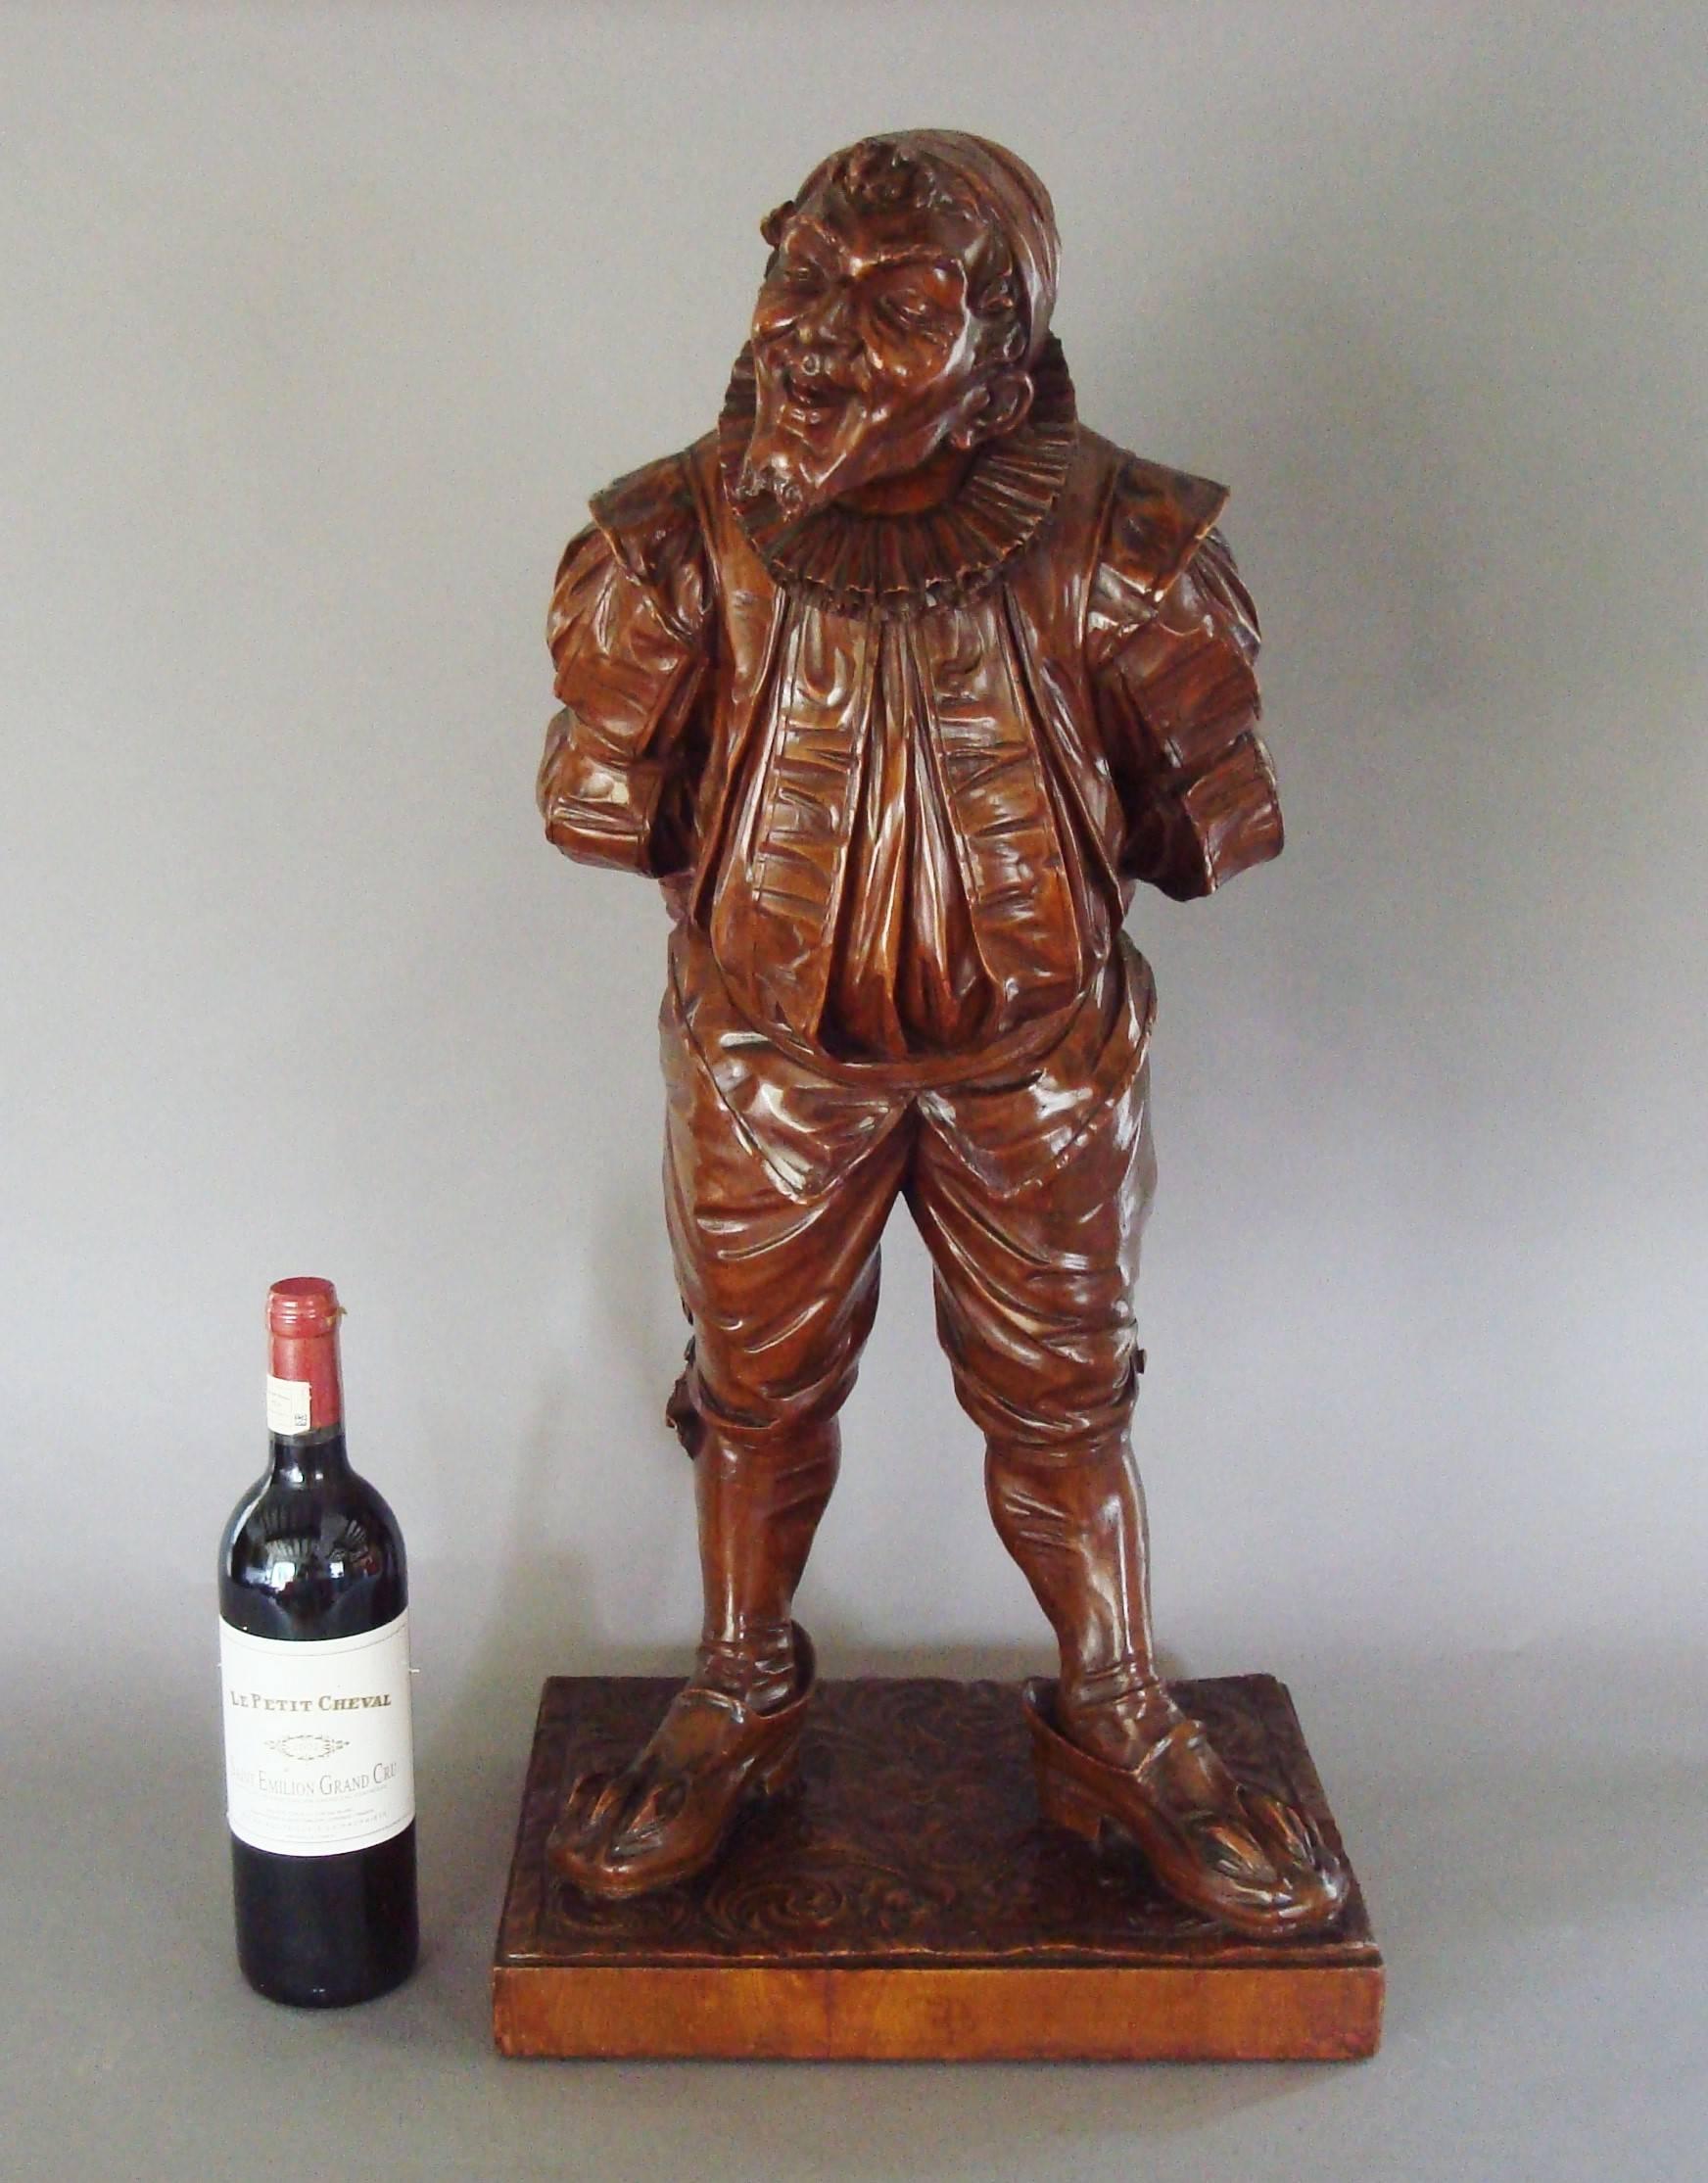 Good 19th century Italian carved walnut 'Gobbo' sculpture
of great charm; from the renowned 'Eric Bramall Collection'; the standing figure leaning forward with his hunchback, and hands clasped behind his back, dressed in traditional costume with